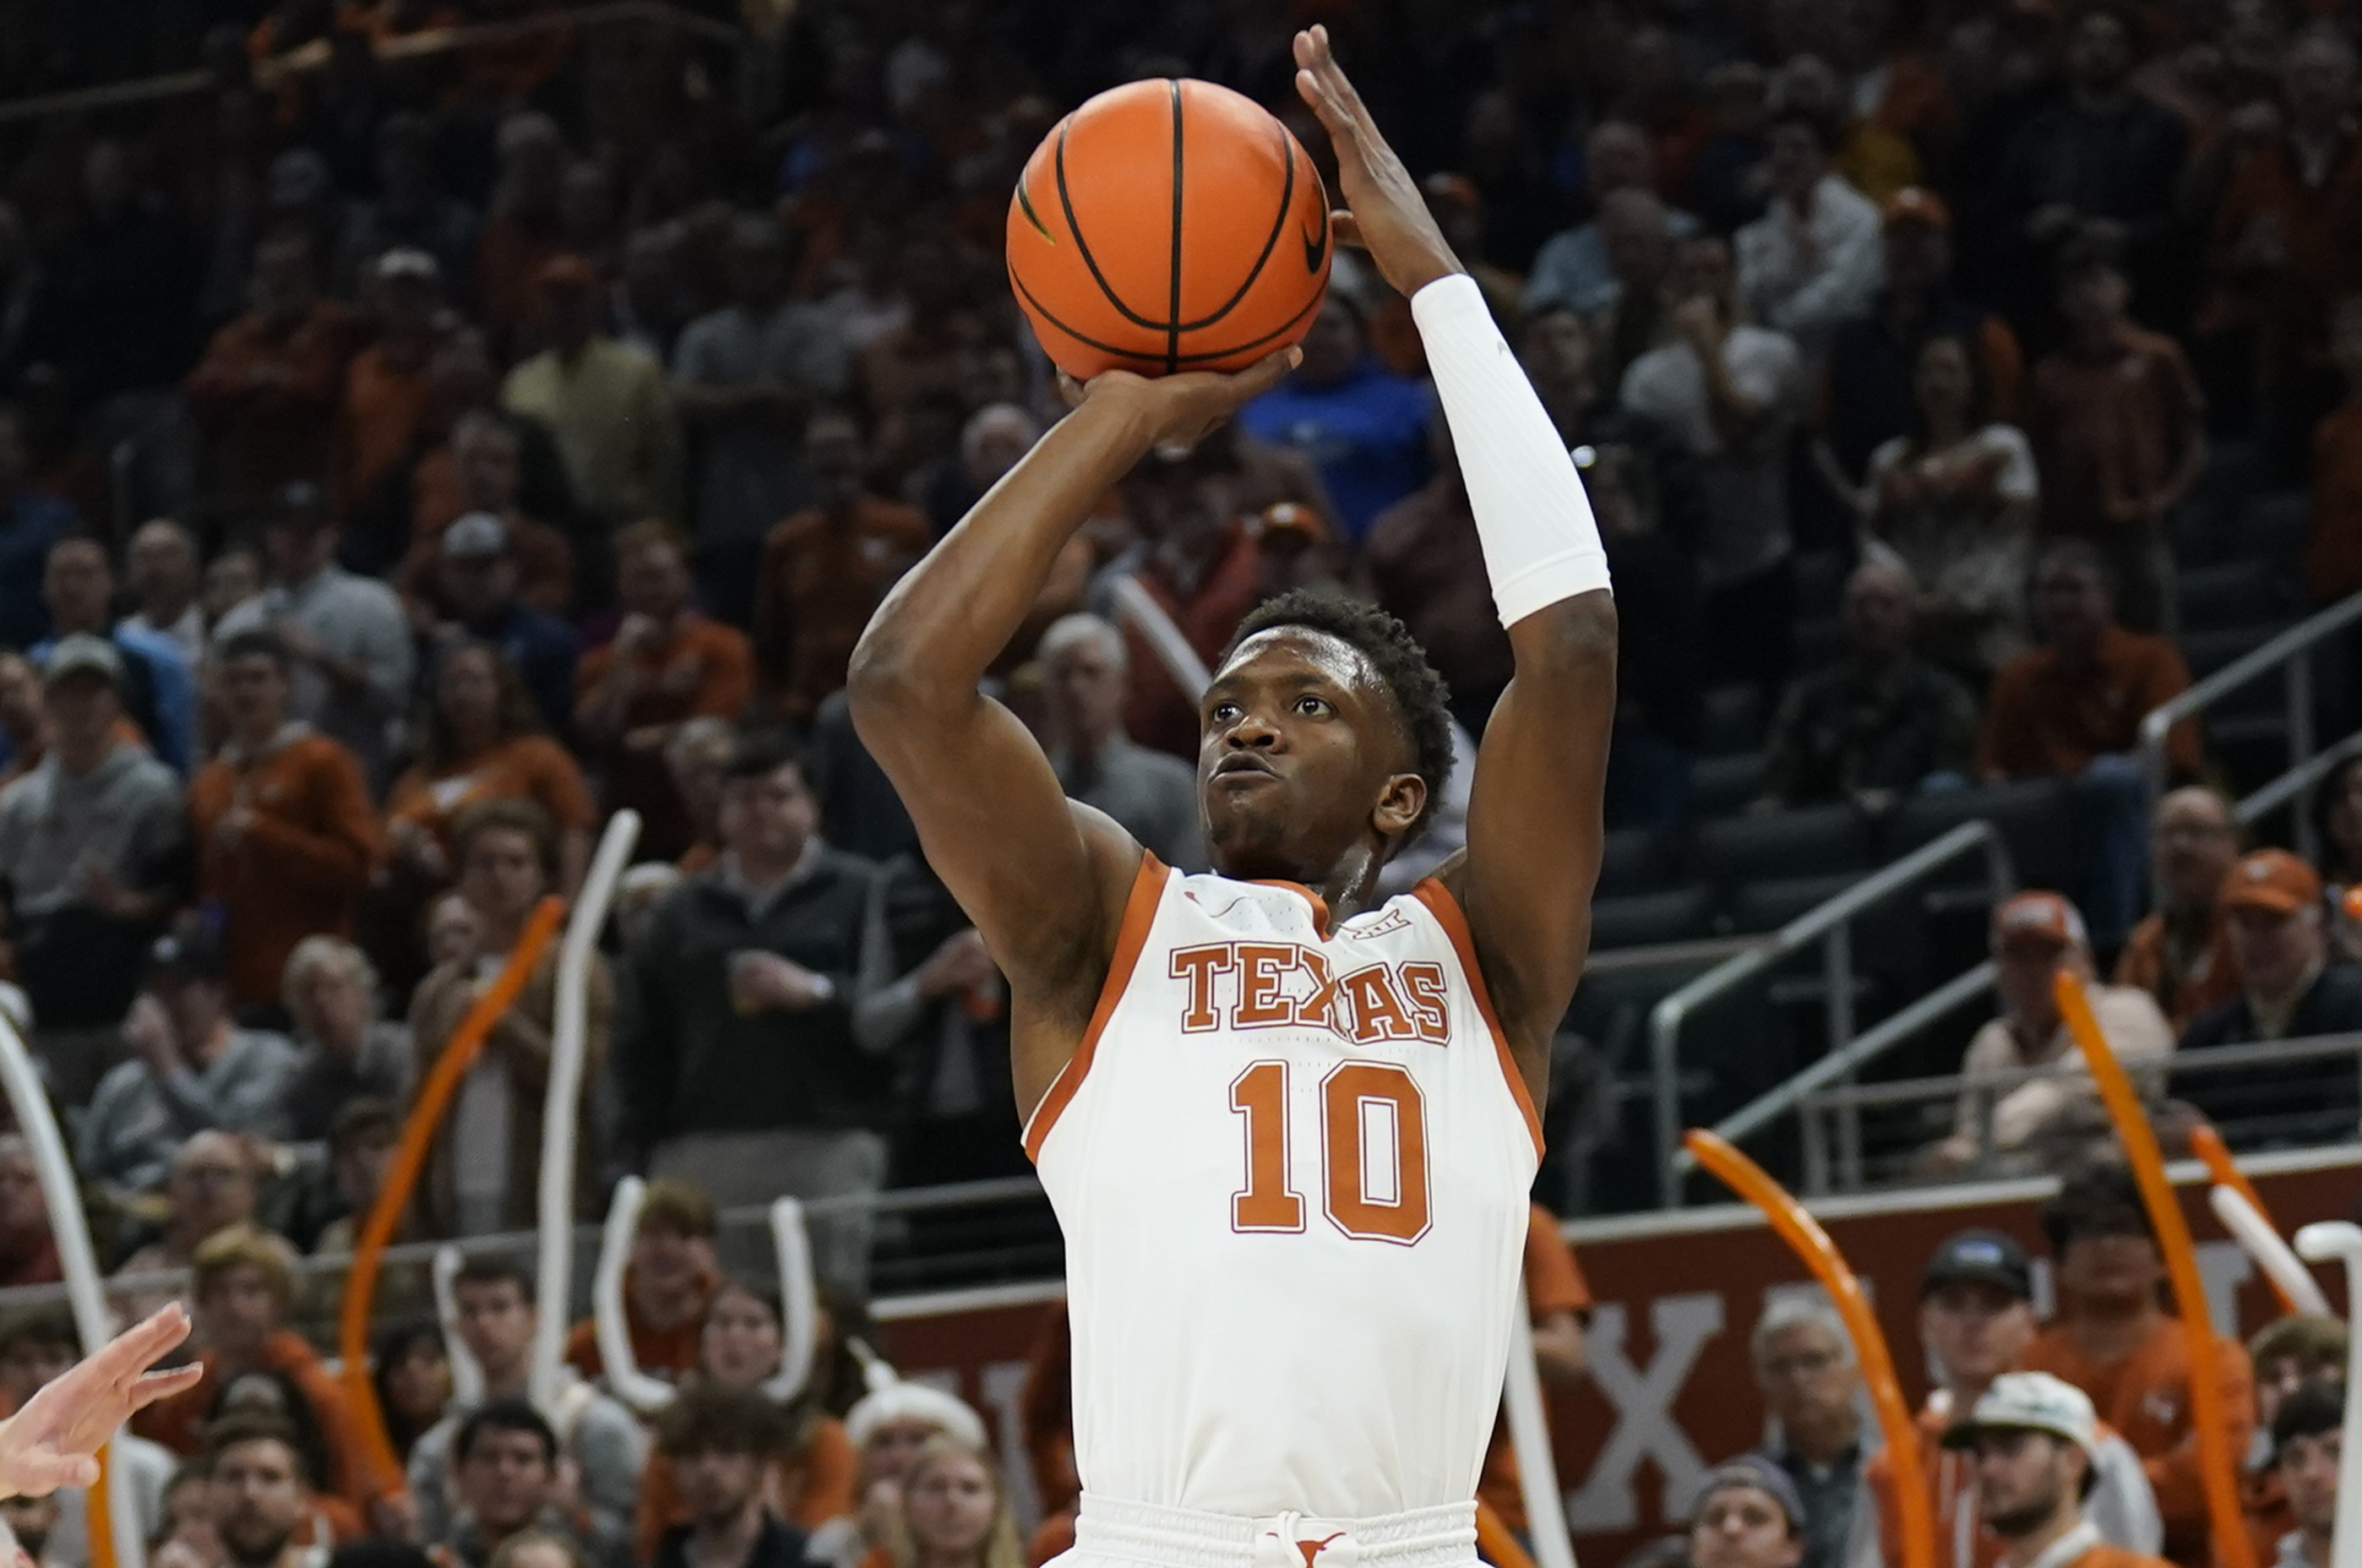 How to Watch, Preview: No. 2 Texas Longhorns vs. No. 17 Illinois Fighting Illini